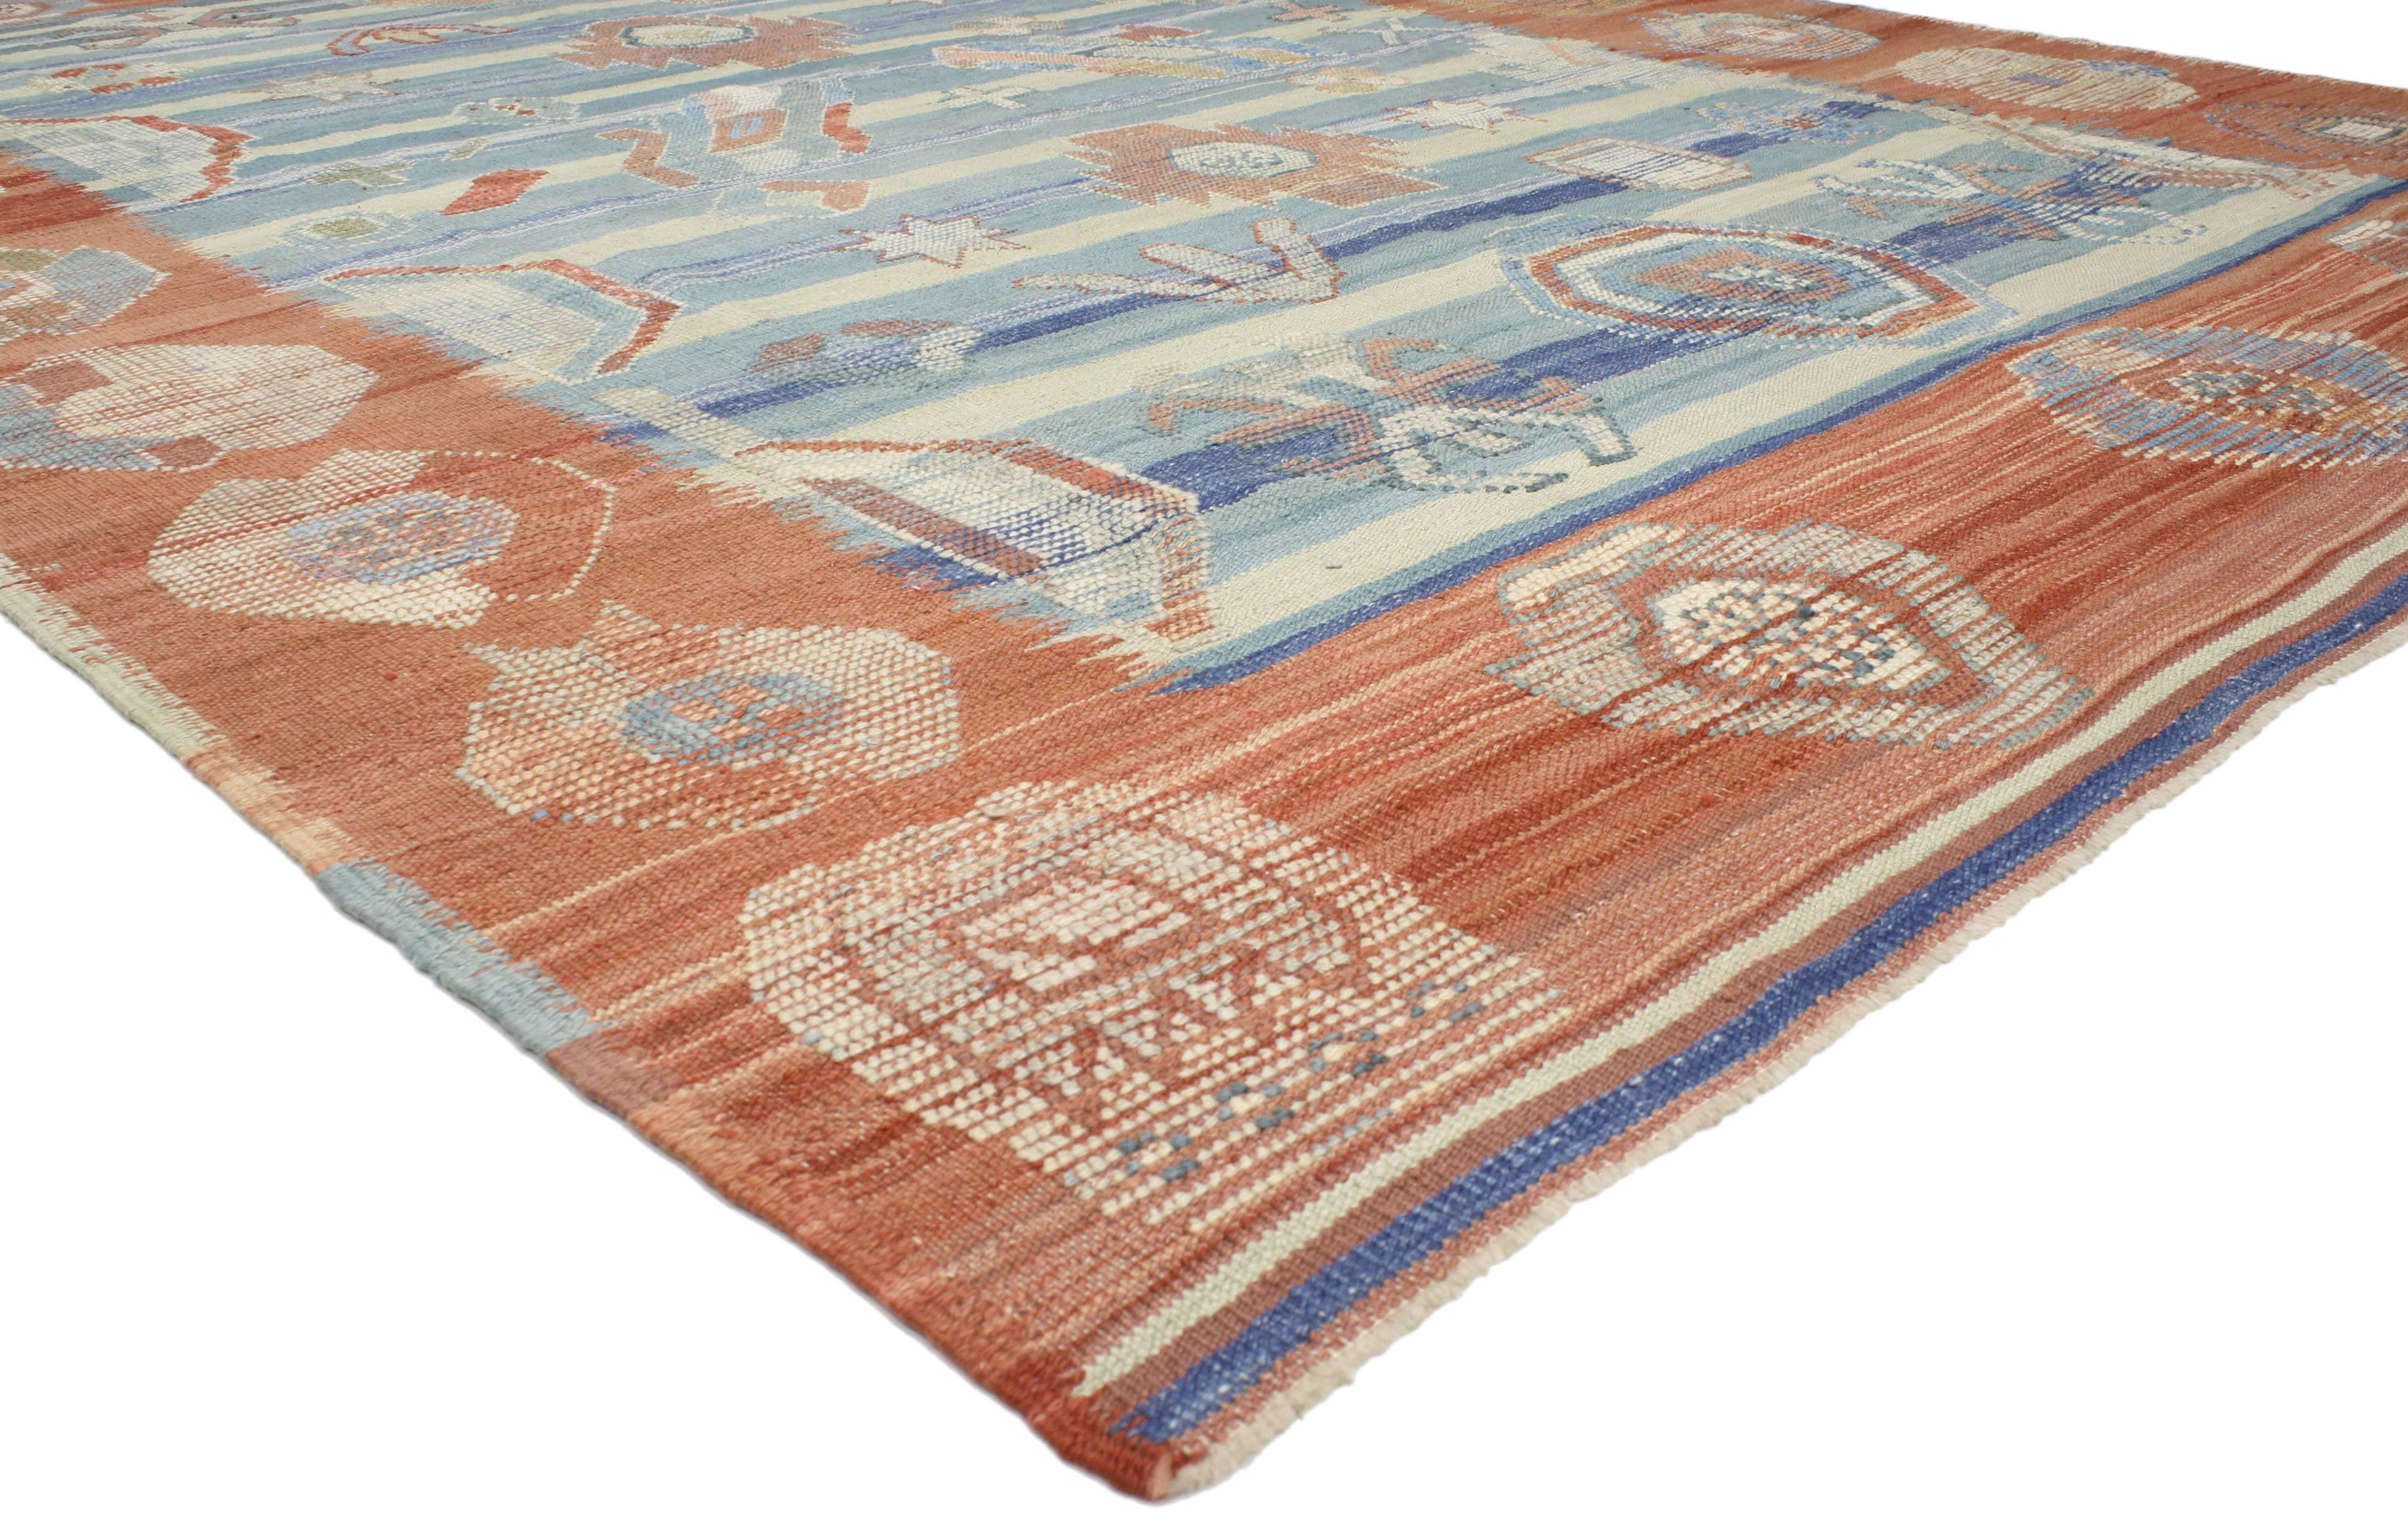 52200 blue and orange Turkish Kilim rug with tribal style. This Turkish Kilim rug has a distinctly tribal style with geometric shapes galore. The pastel orange and blue hues give it a warm, inviting feel and relaxing vibe. The design of this kilim